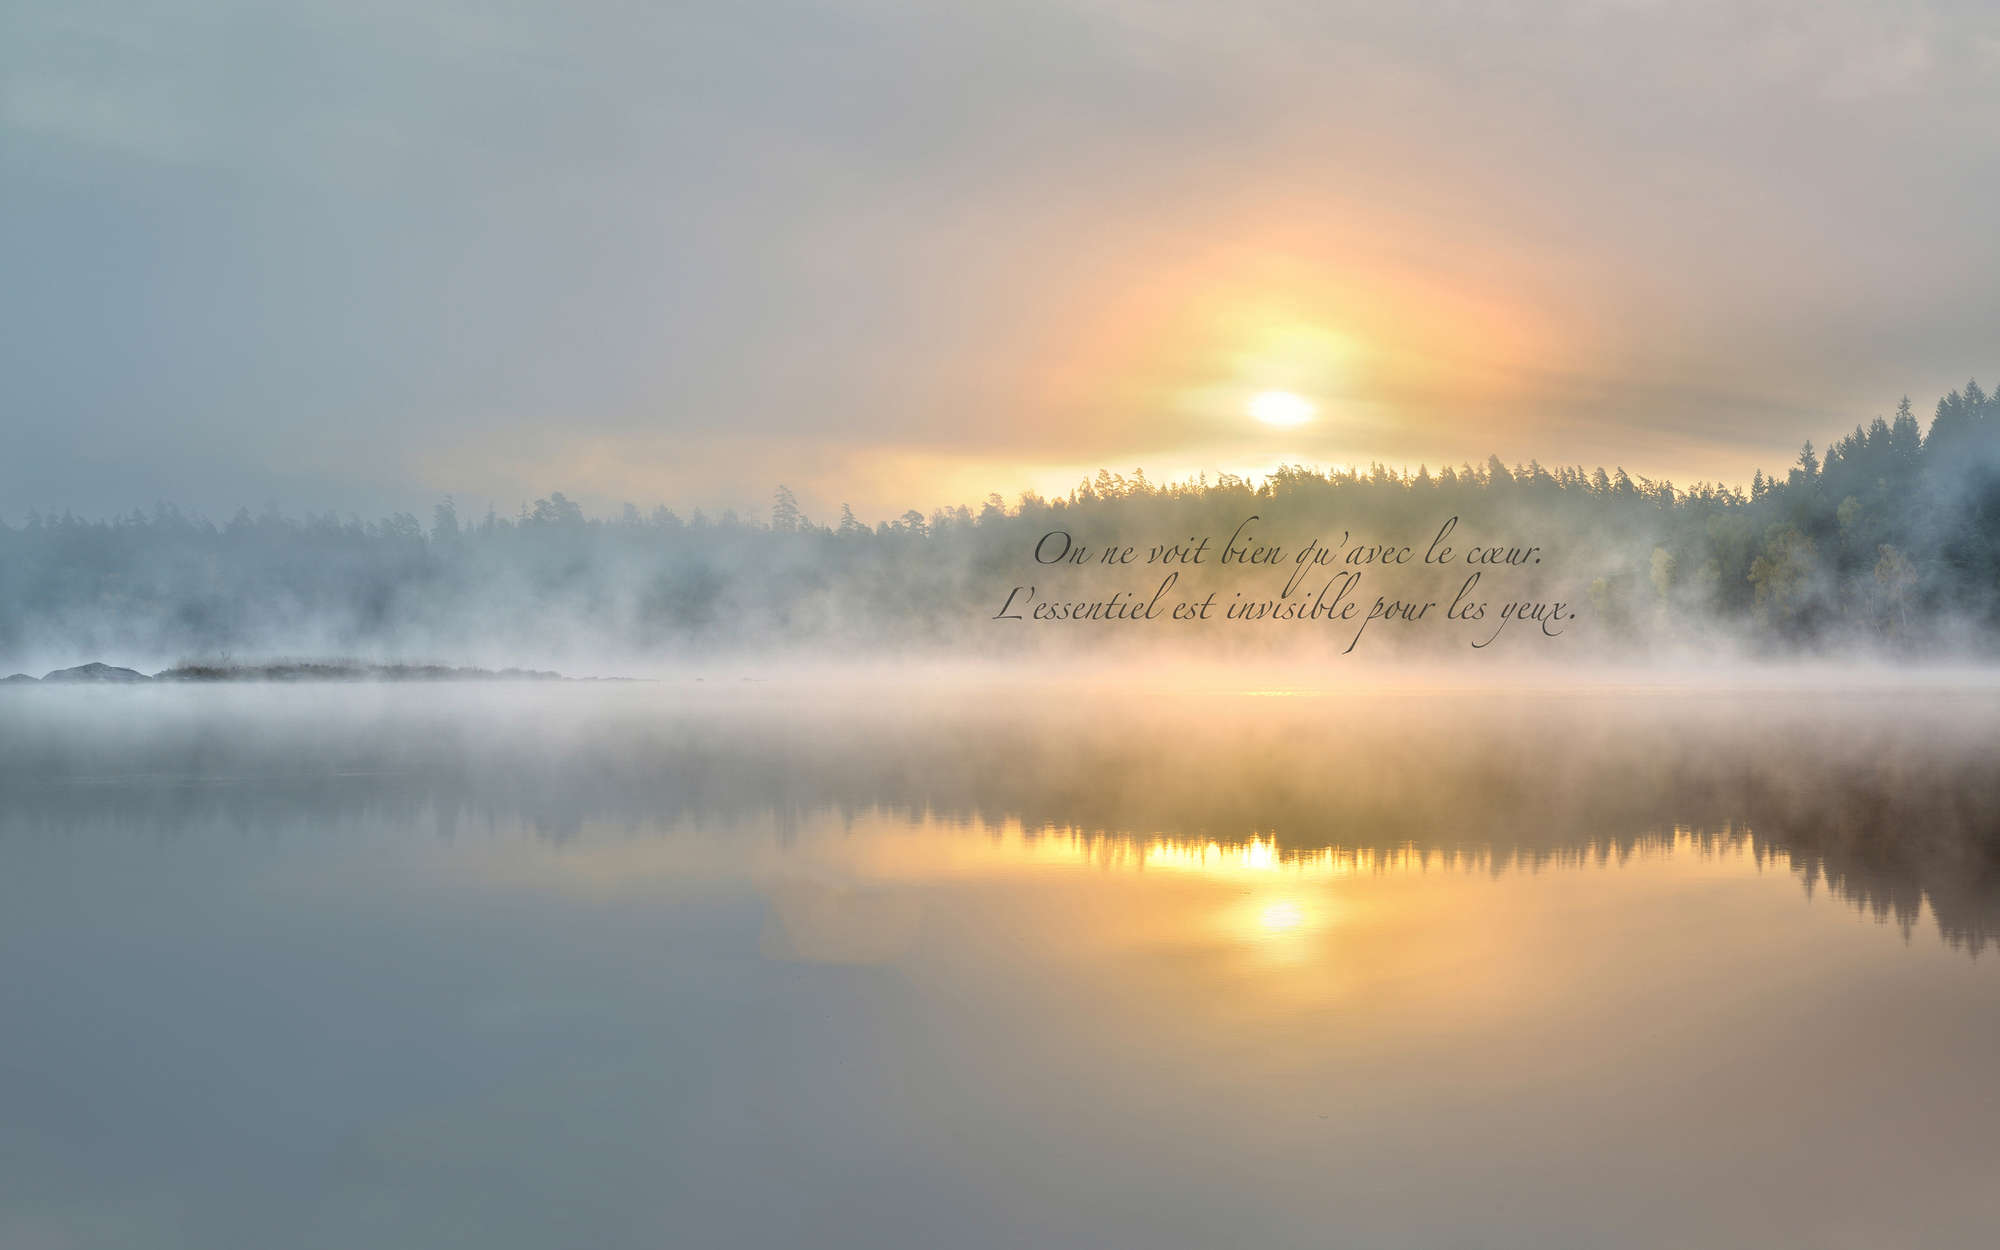             Photo wallpaper foggy lake with lettering - Premium smooth fleece
        